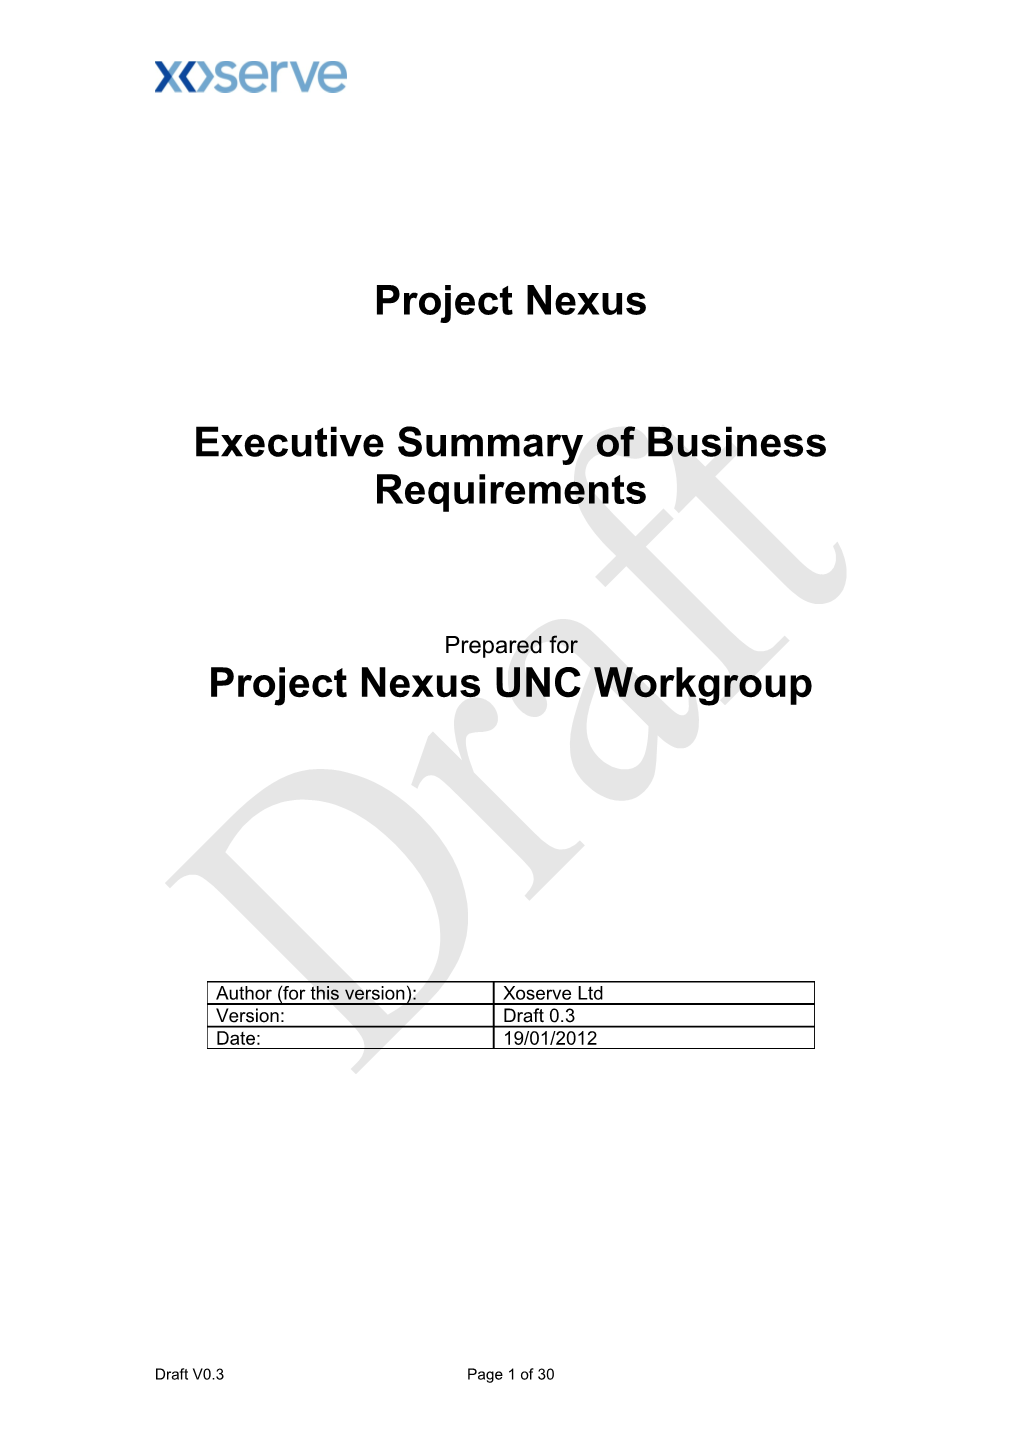 Executive Summary of Business Requirements